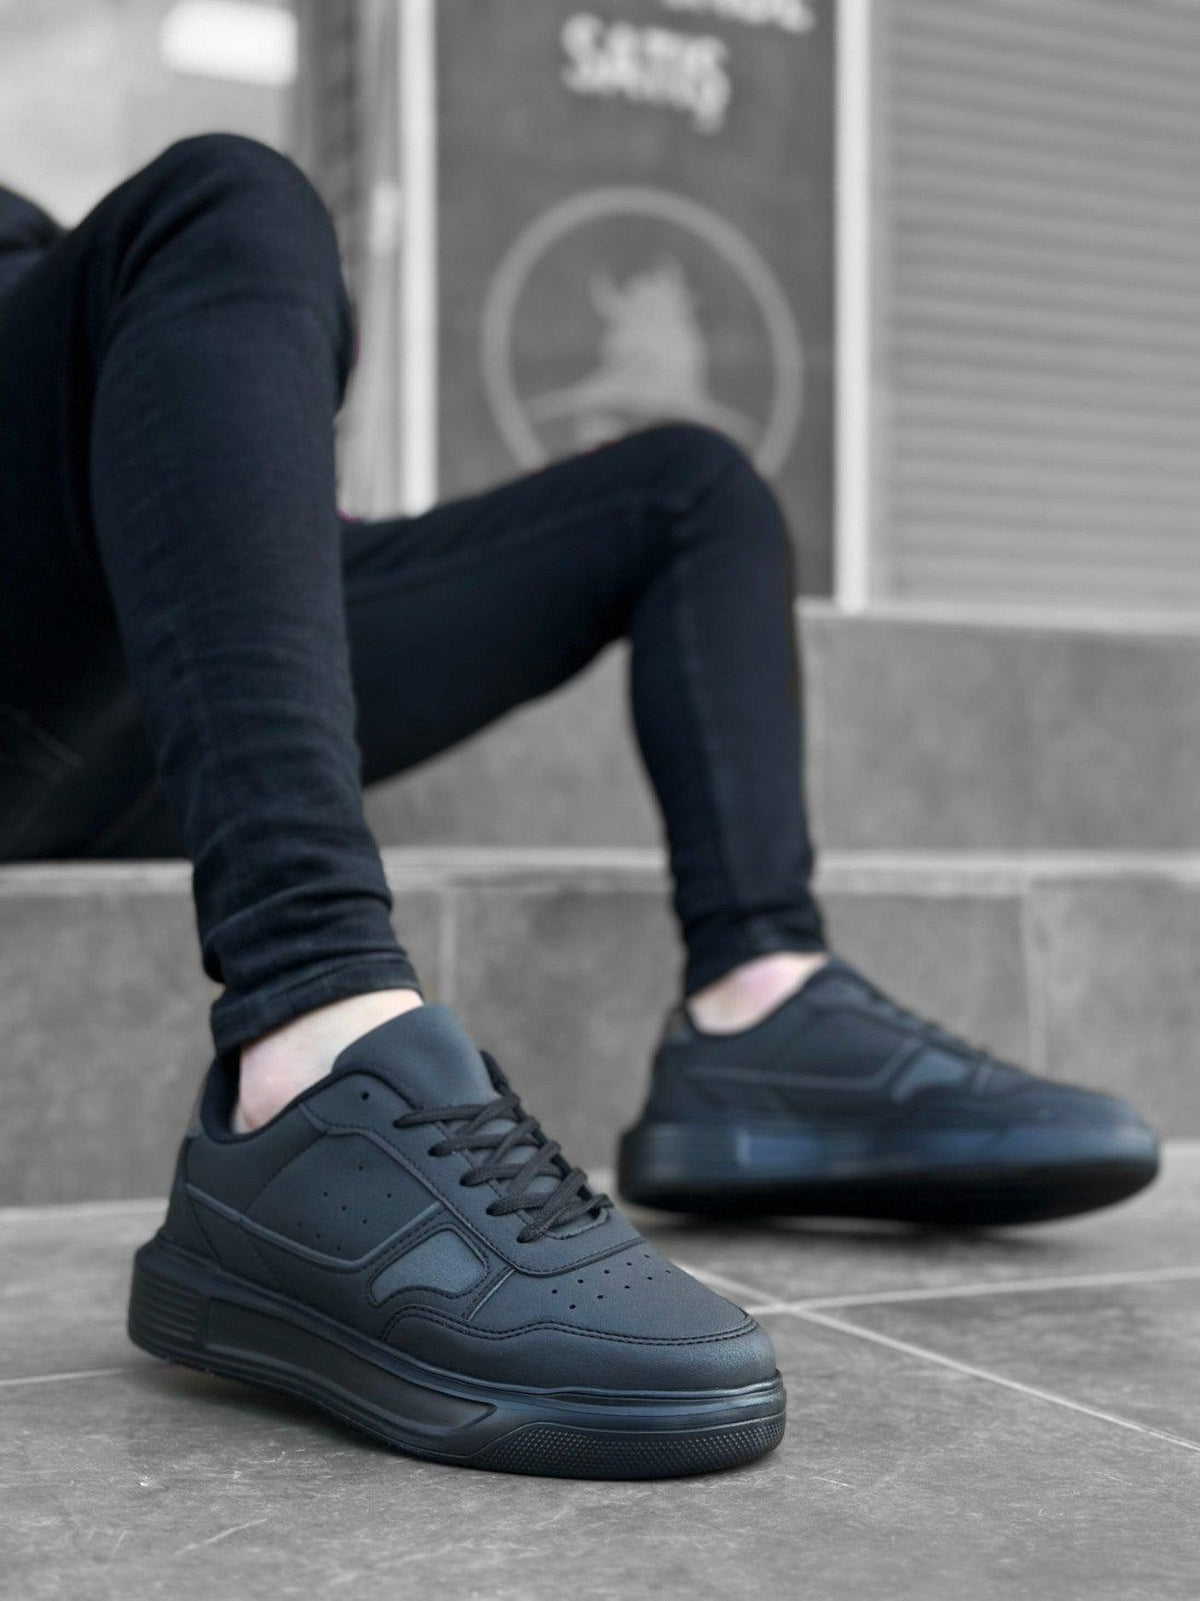 BA0221 Thick High Sole Lace-Up Black Men's Sneakers Shoes - STREET MODE ™